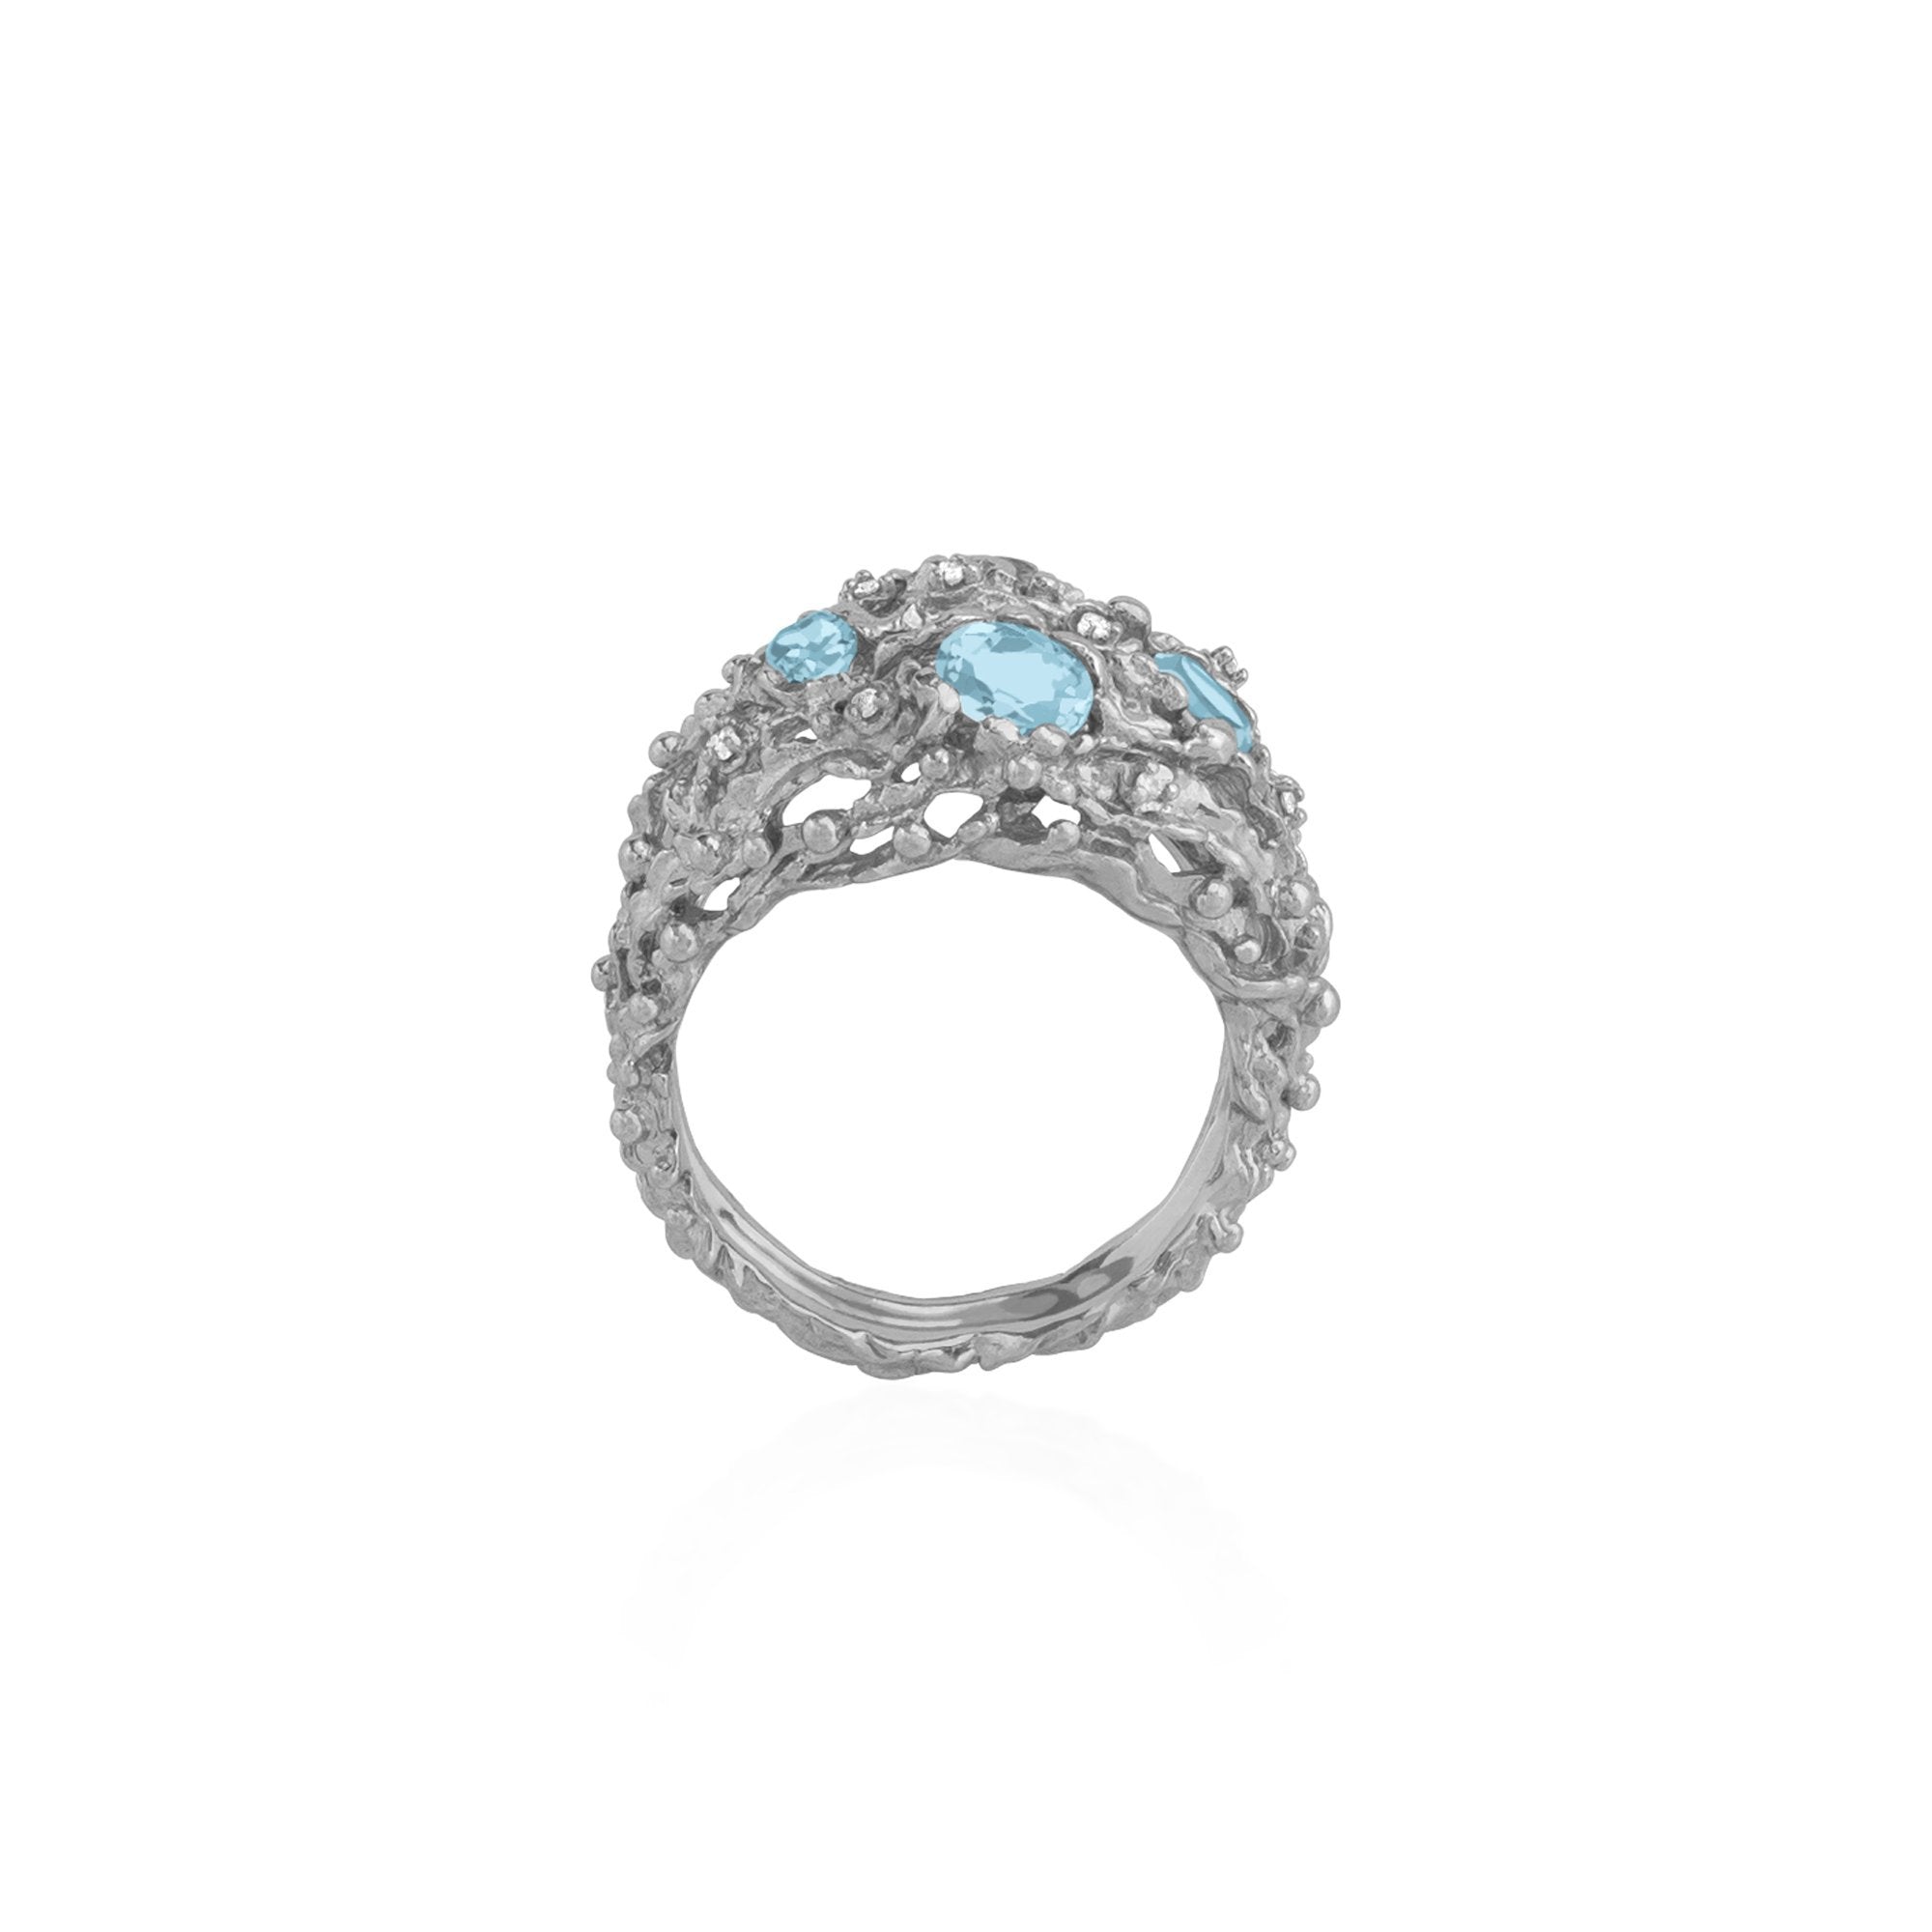 Michael Aram Ocean Ring with Blue Topaz and Diamonds